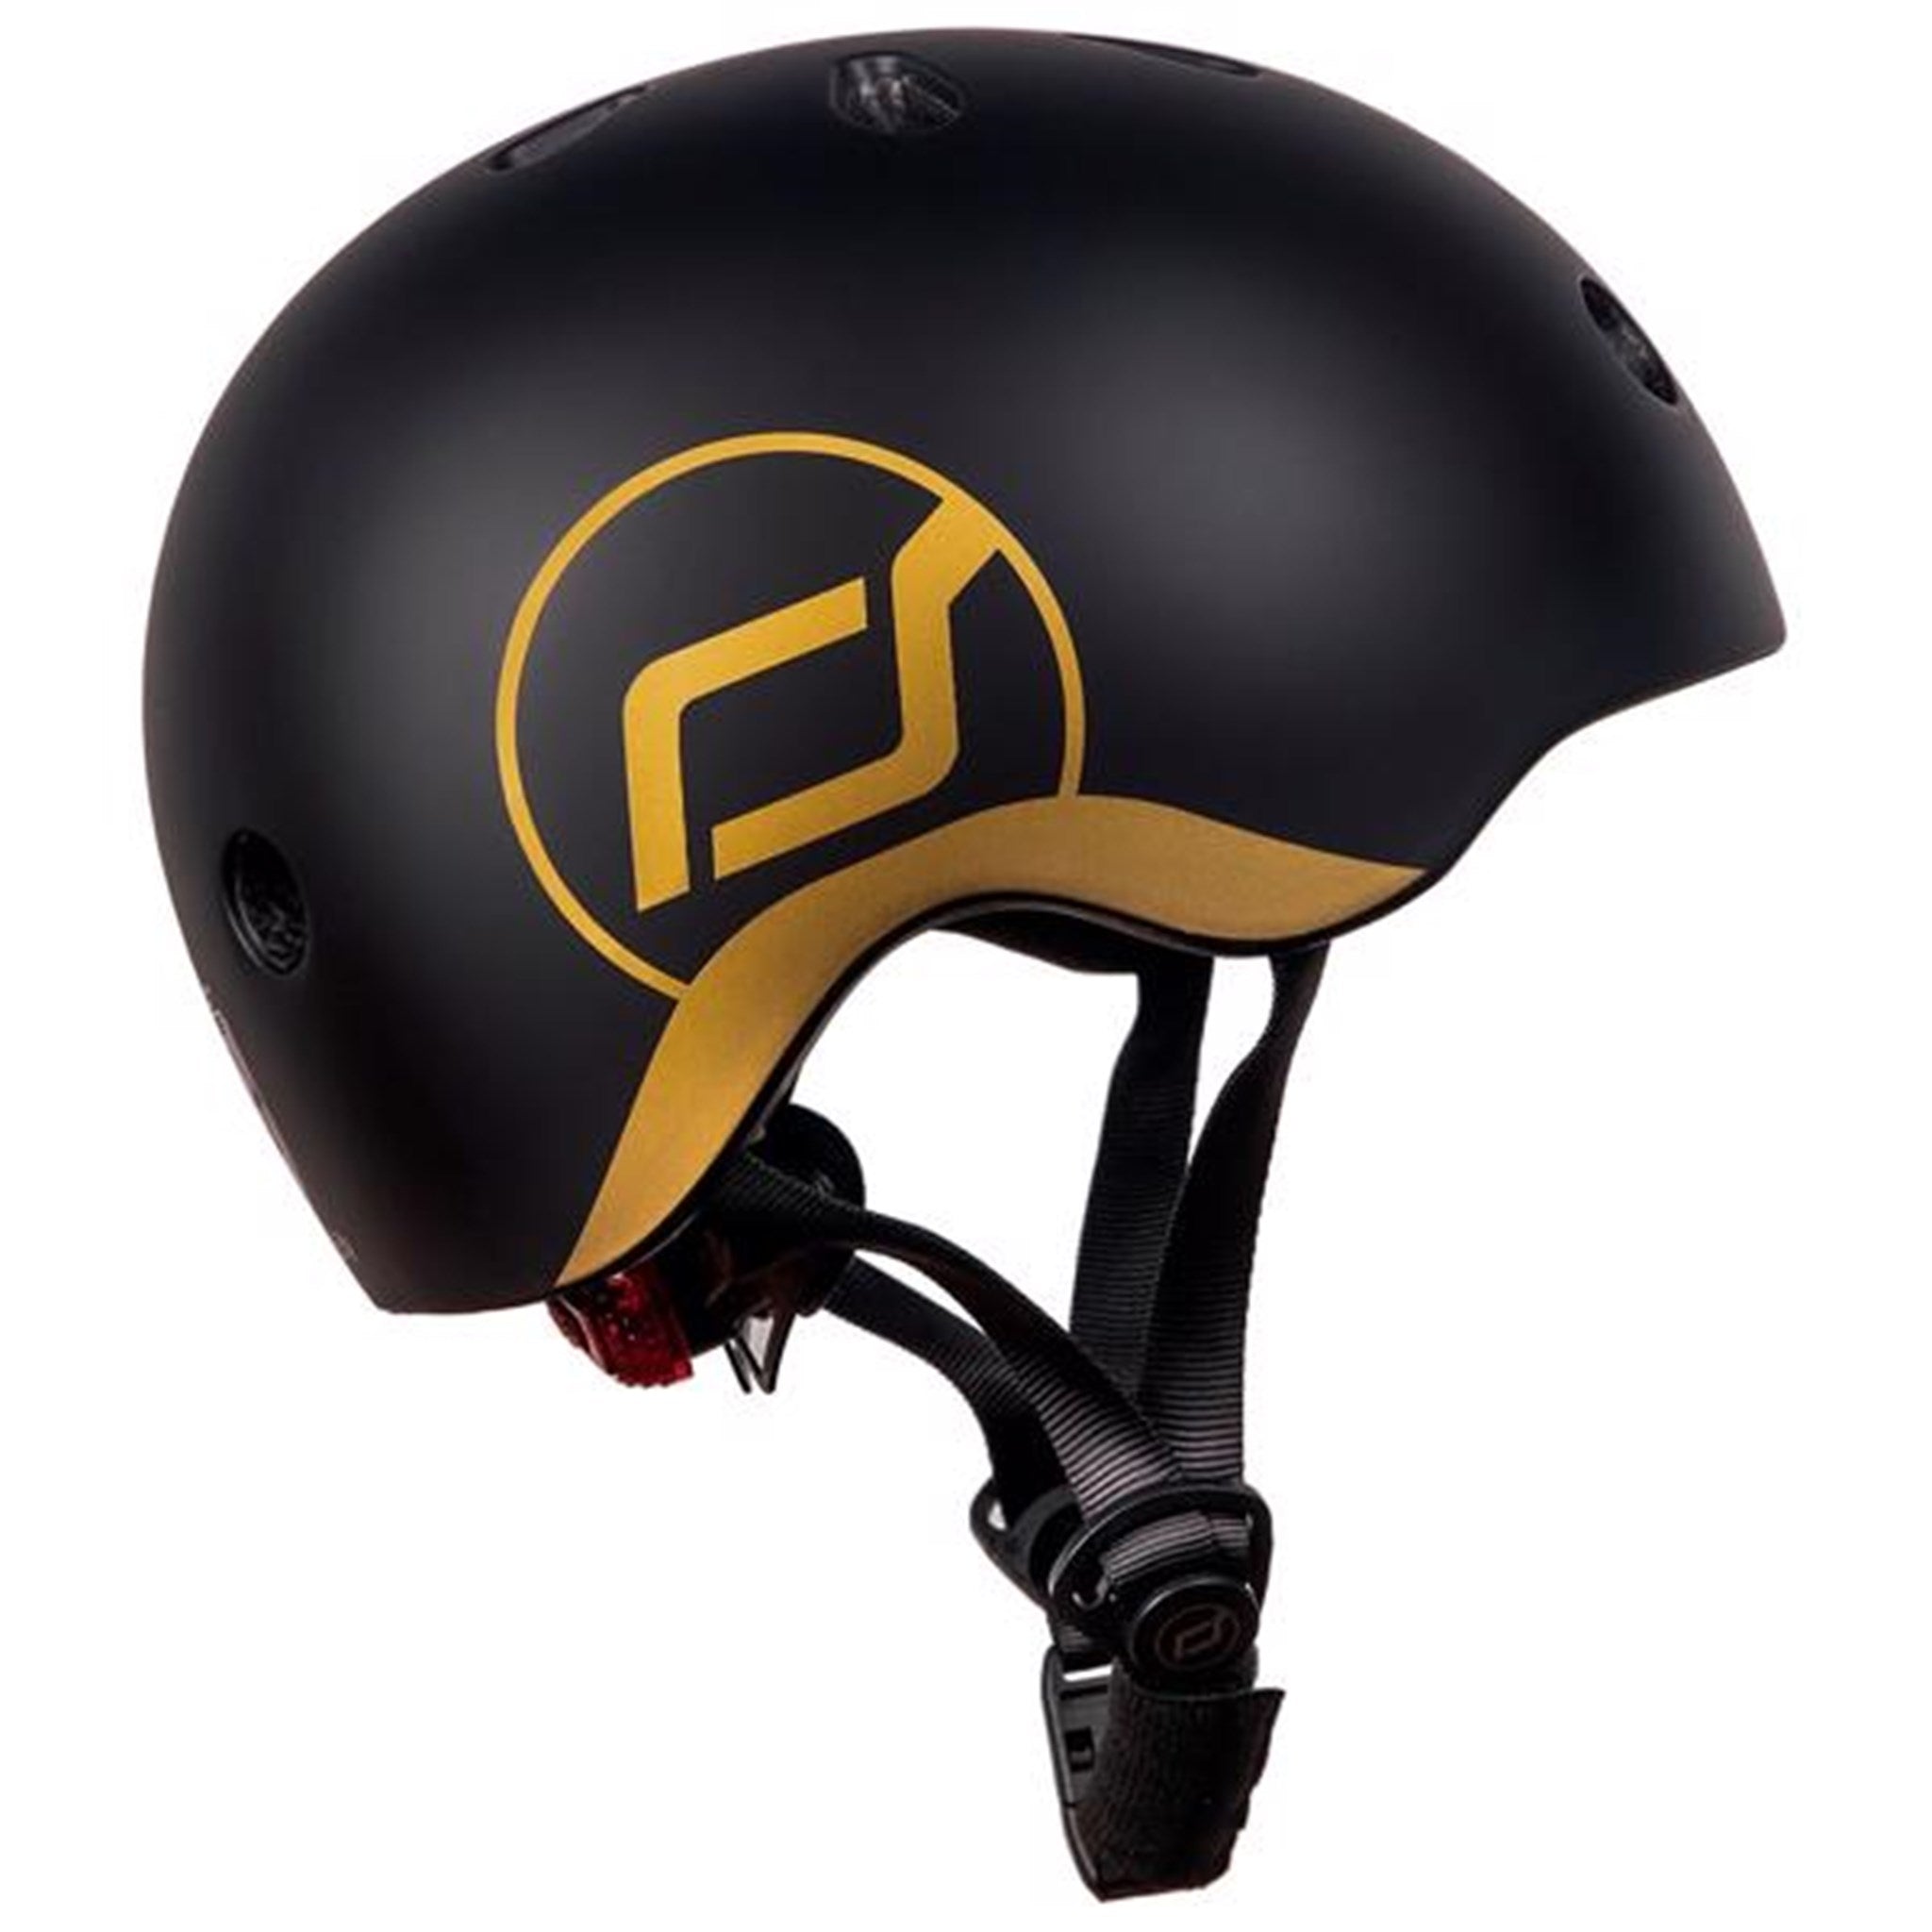 Scoot and Ride Safety Helmet Black/Gold